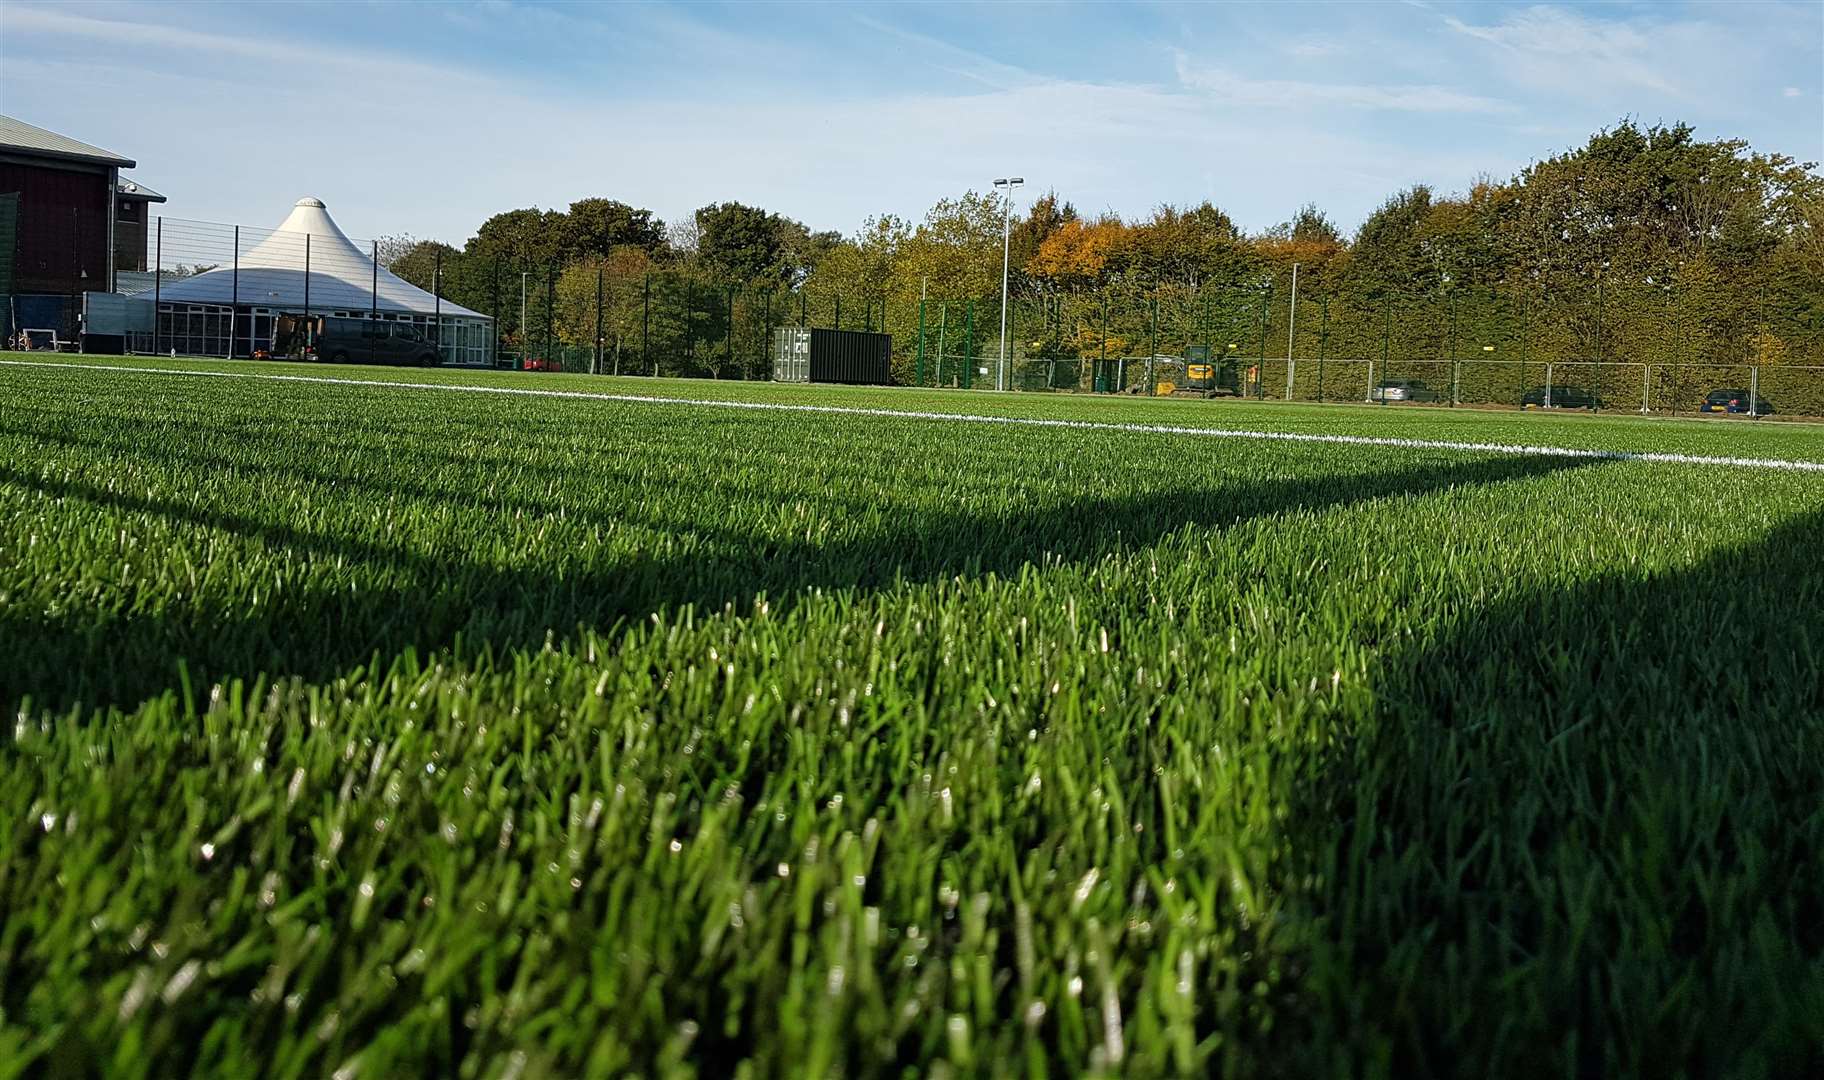 Tenterden Schools Trust Finance Director Mark Seymour: "We are delighted to be offering the community use of the new 3G football pitch at Homewood School & Sixth Form Centre."